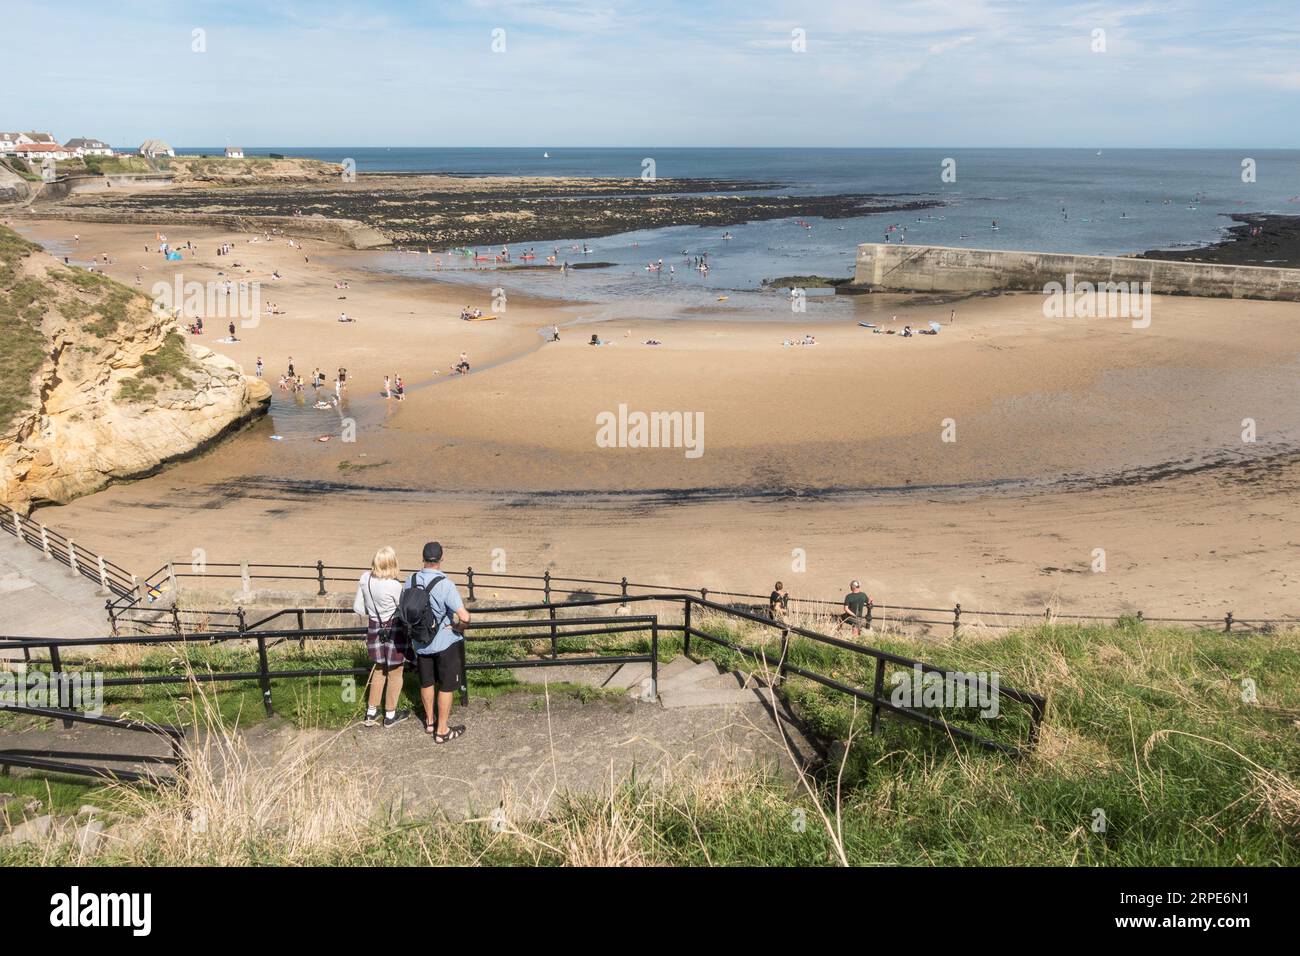 Couple looking out over Cullercoats Bay with holidaymakers on the beach and in the sea, England, UK Stock Photo